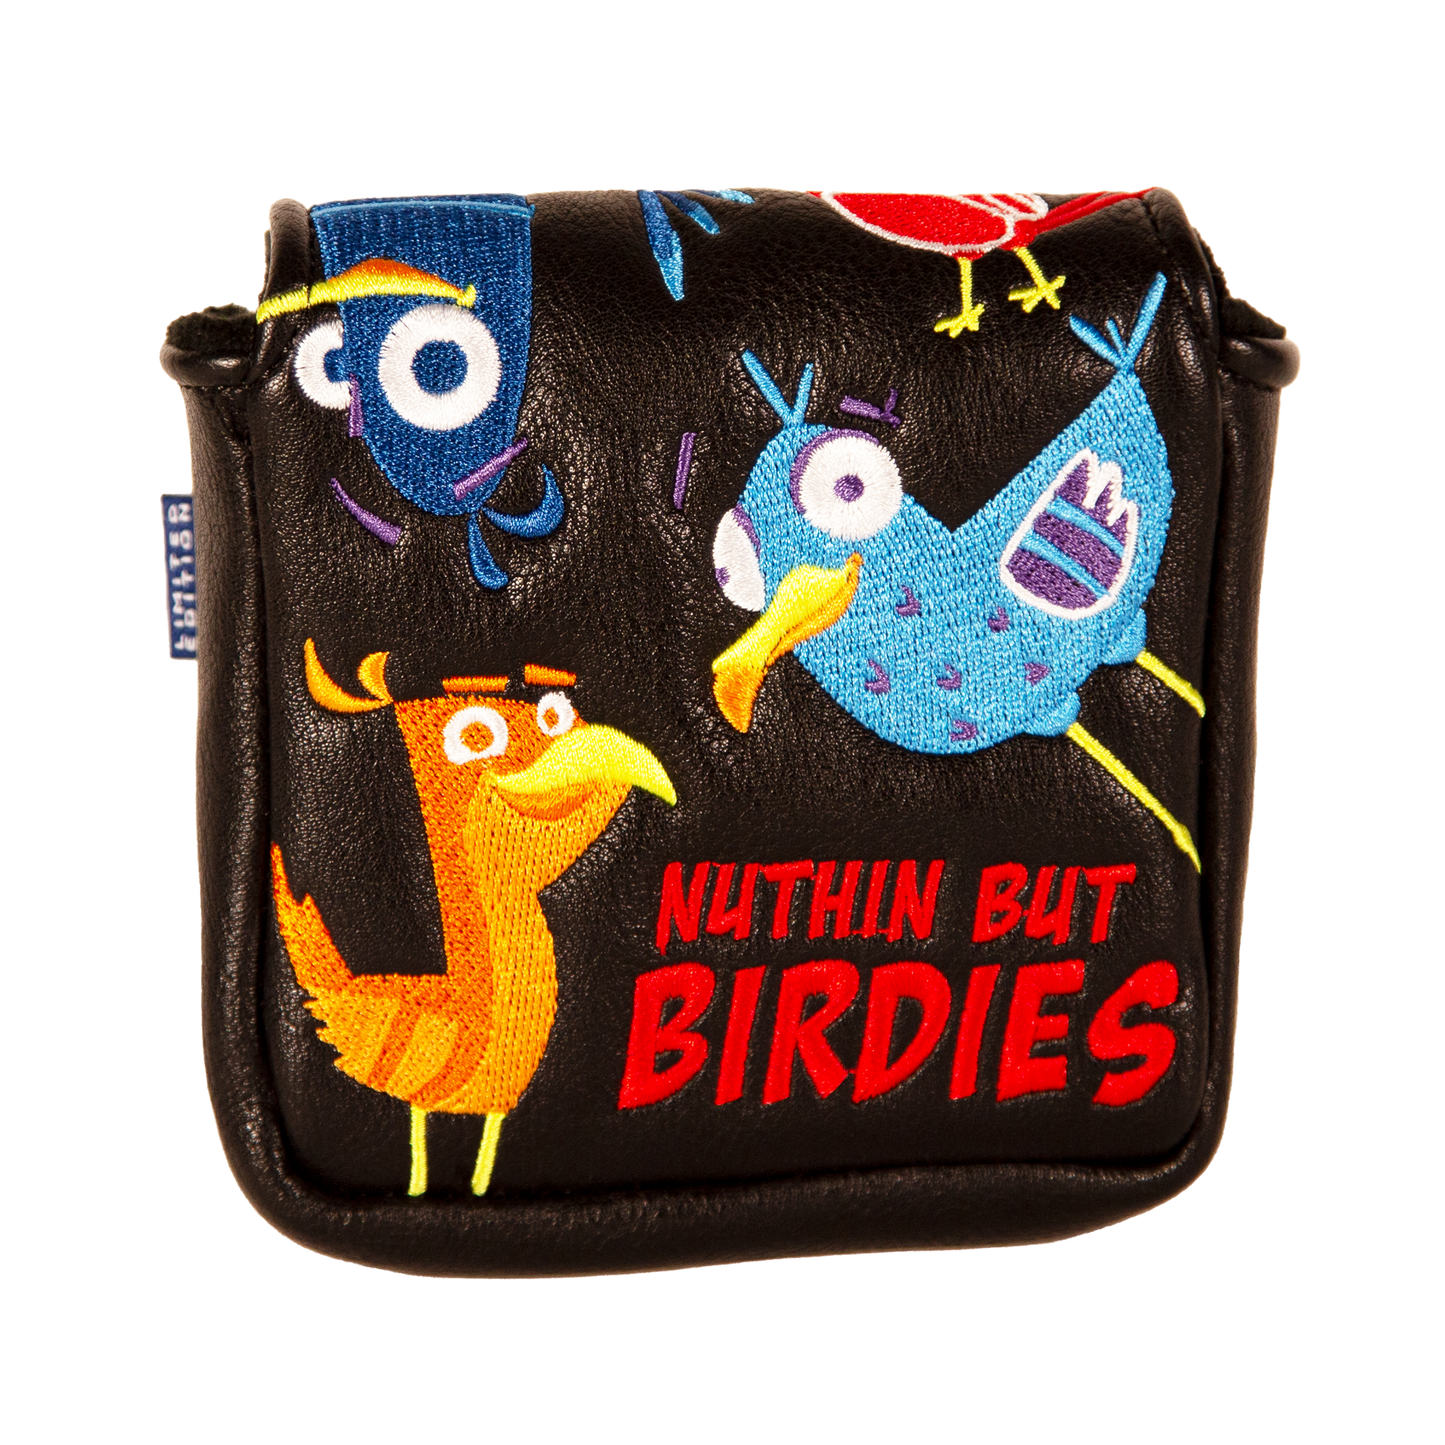 Nuthin But Birdies Mallet Putter Cover